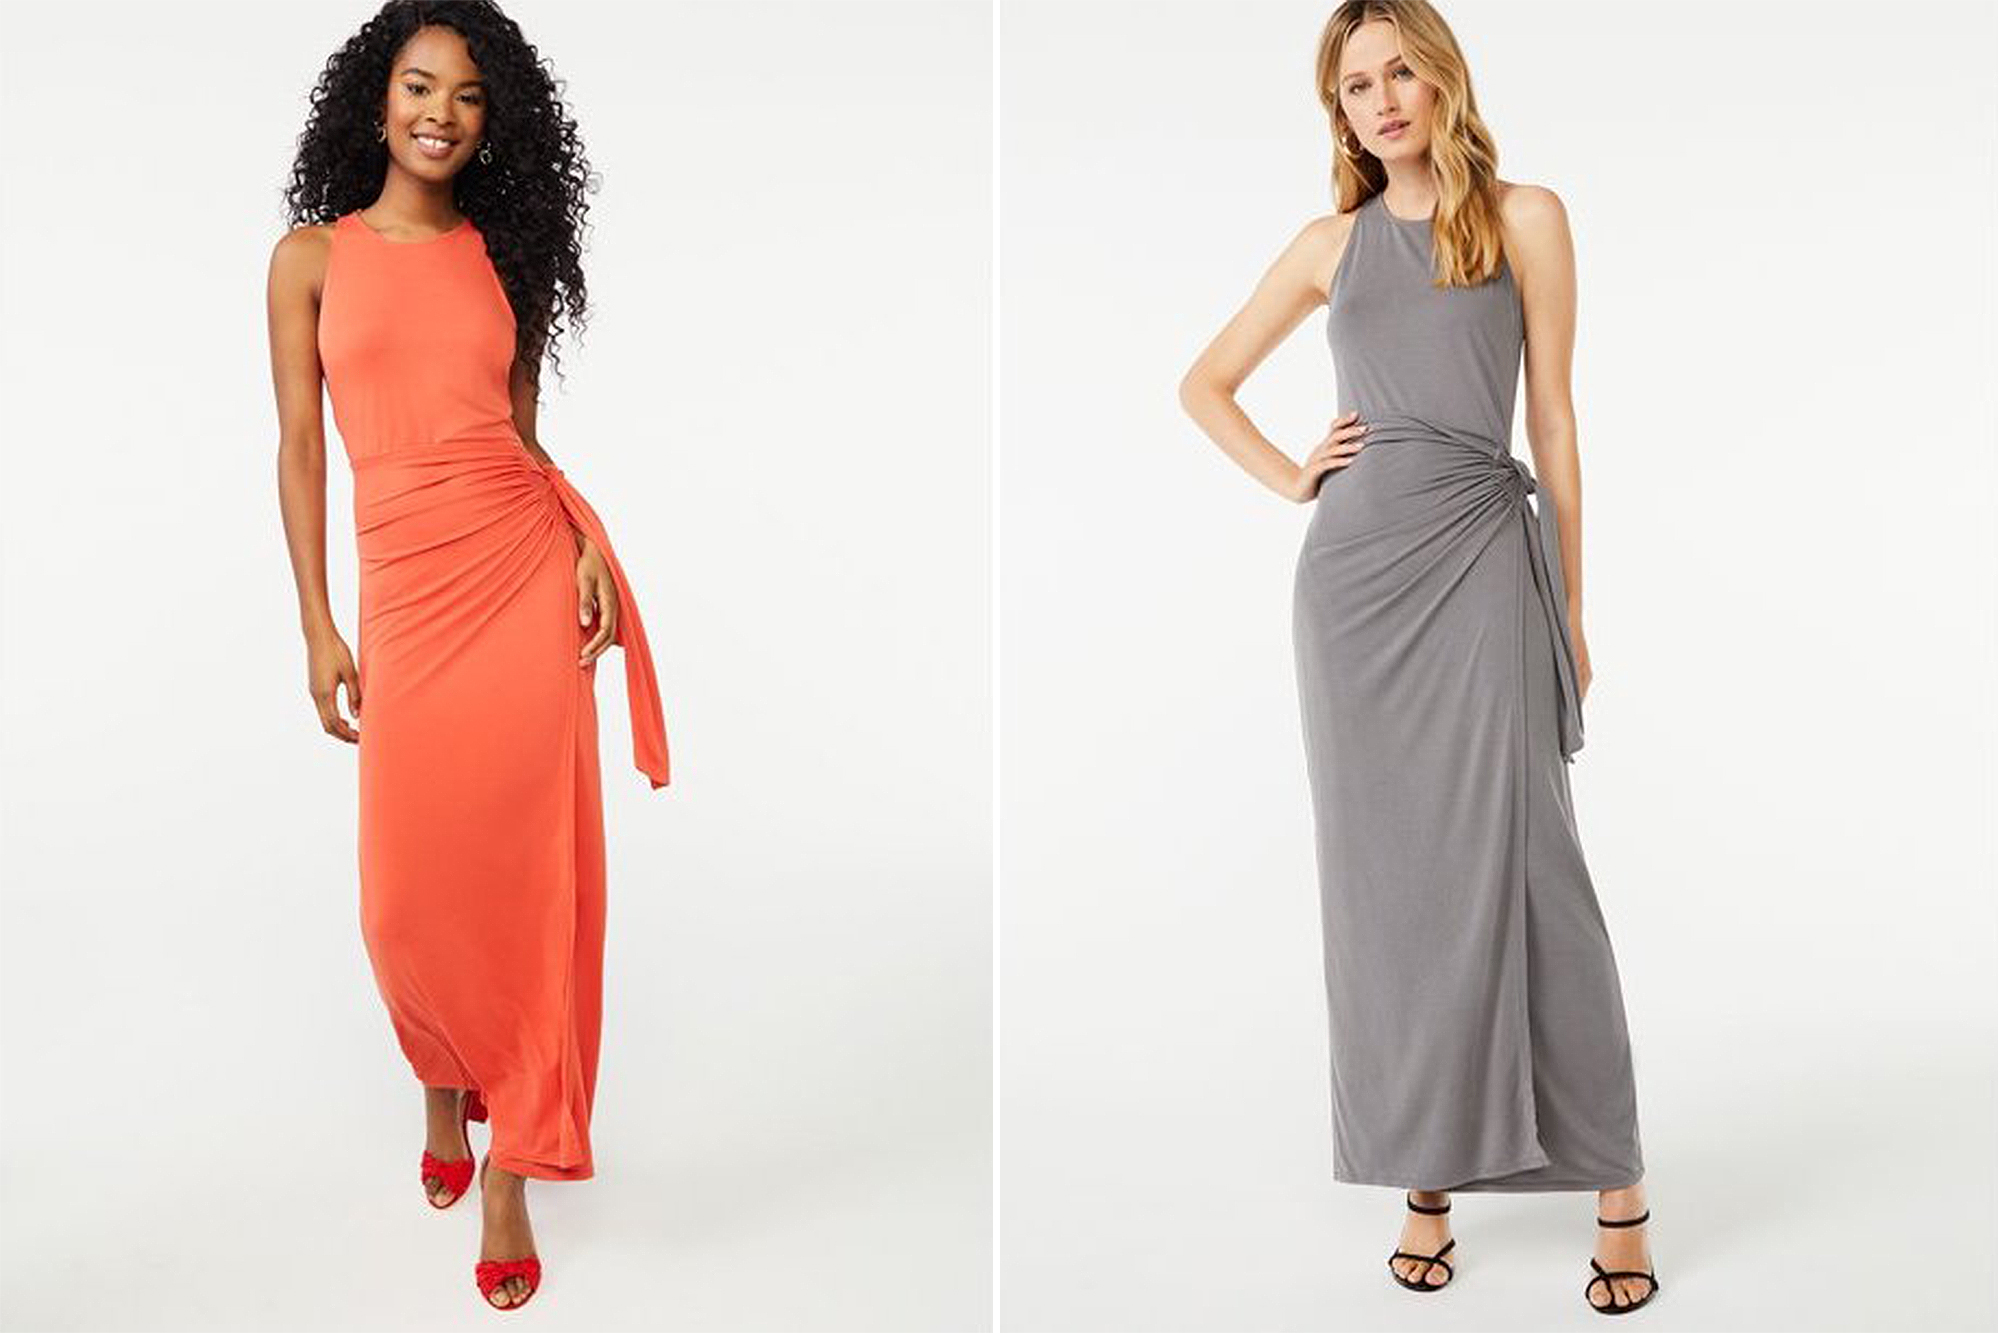 Scoop Simple Maxi Dress Has a Draped Detail That Shoppers Adore